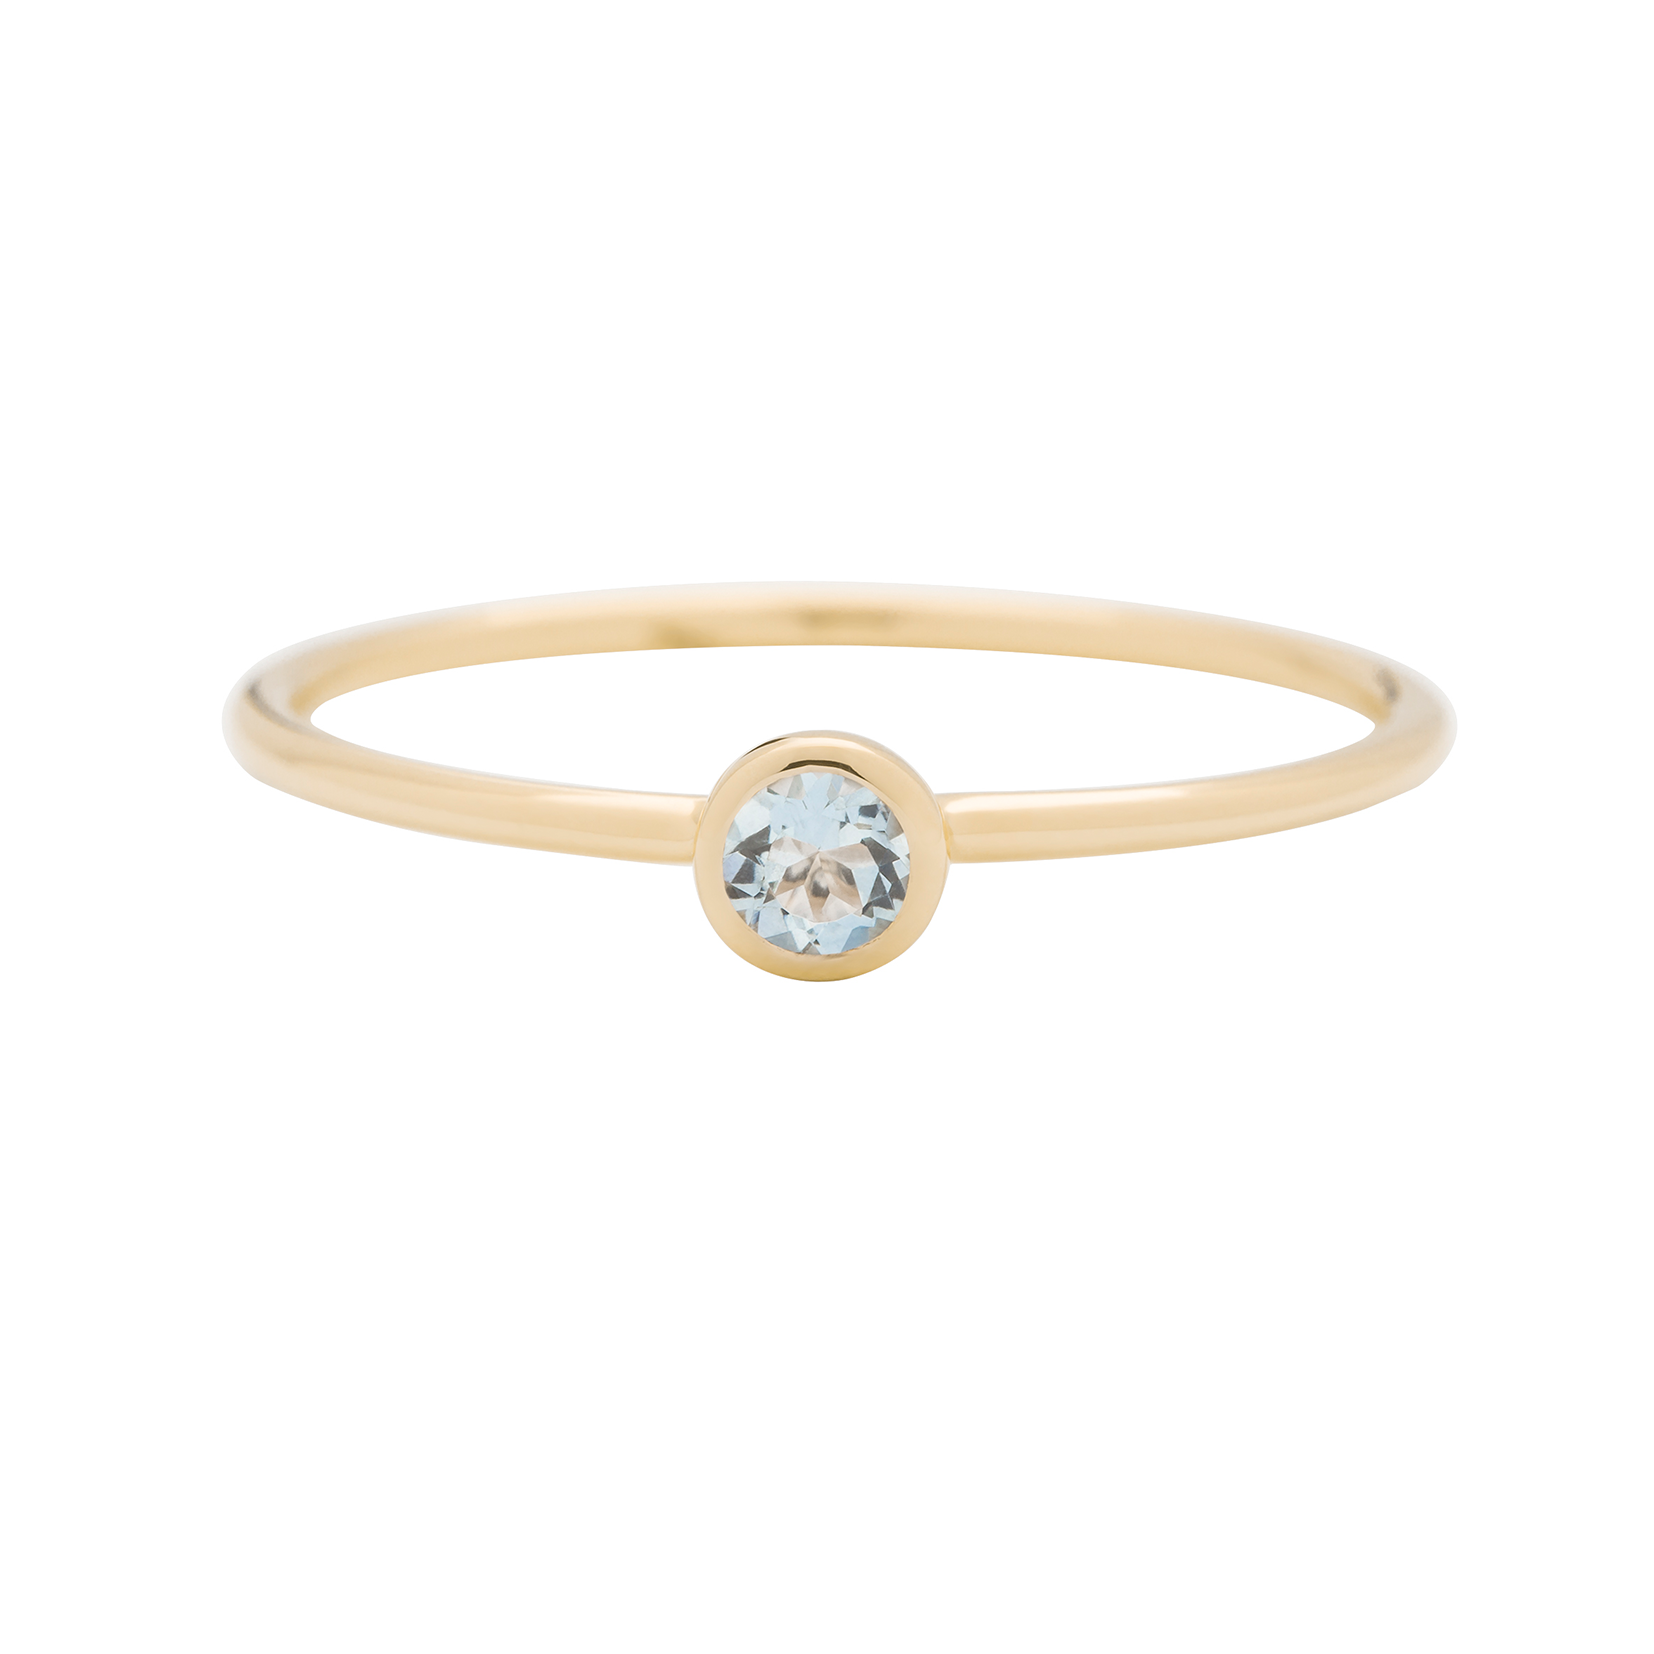 Metier by Tomfoolery: Aquamarine Stacking Rings